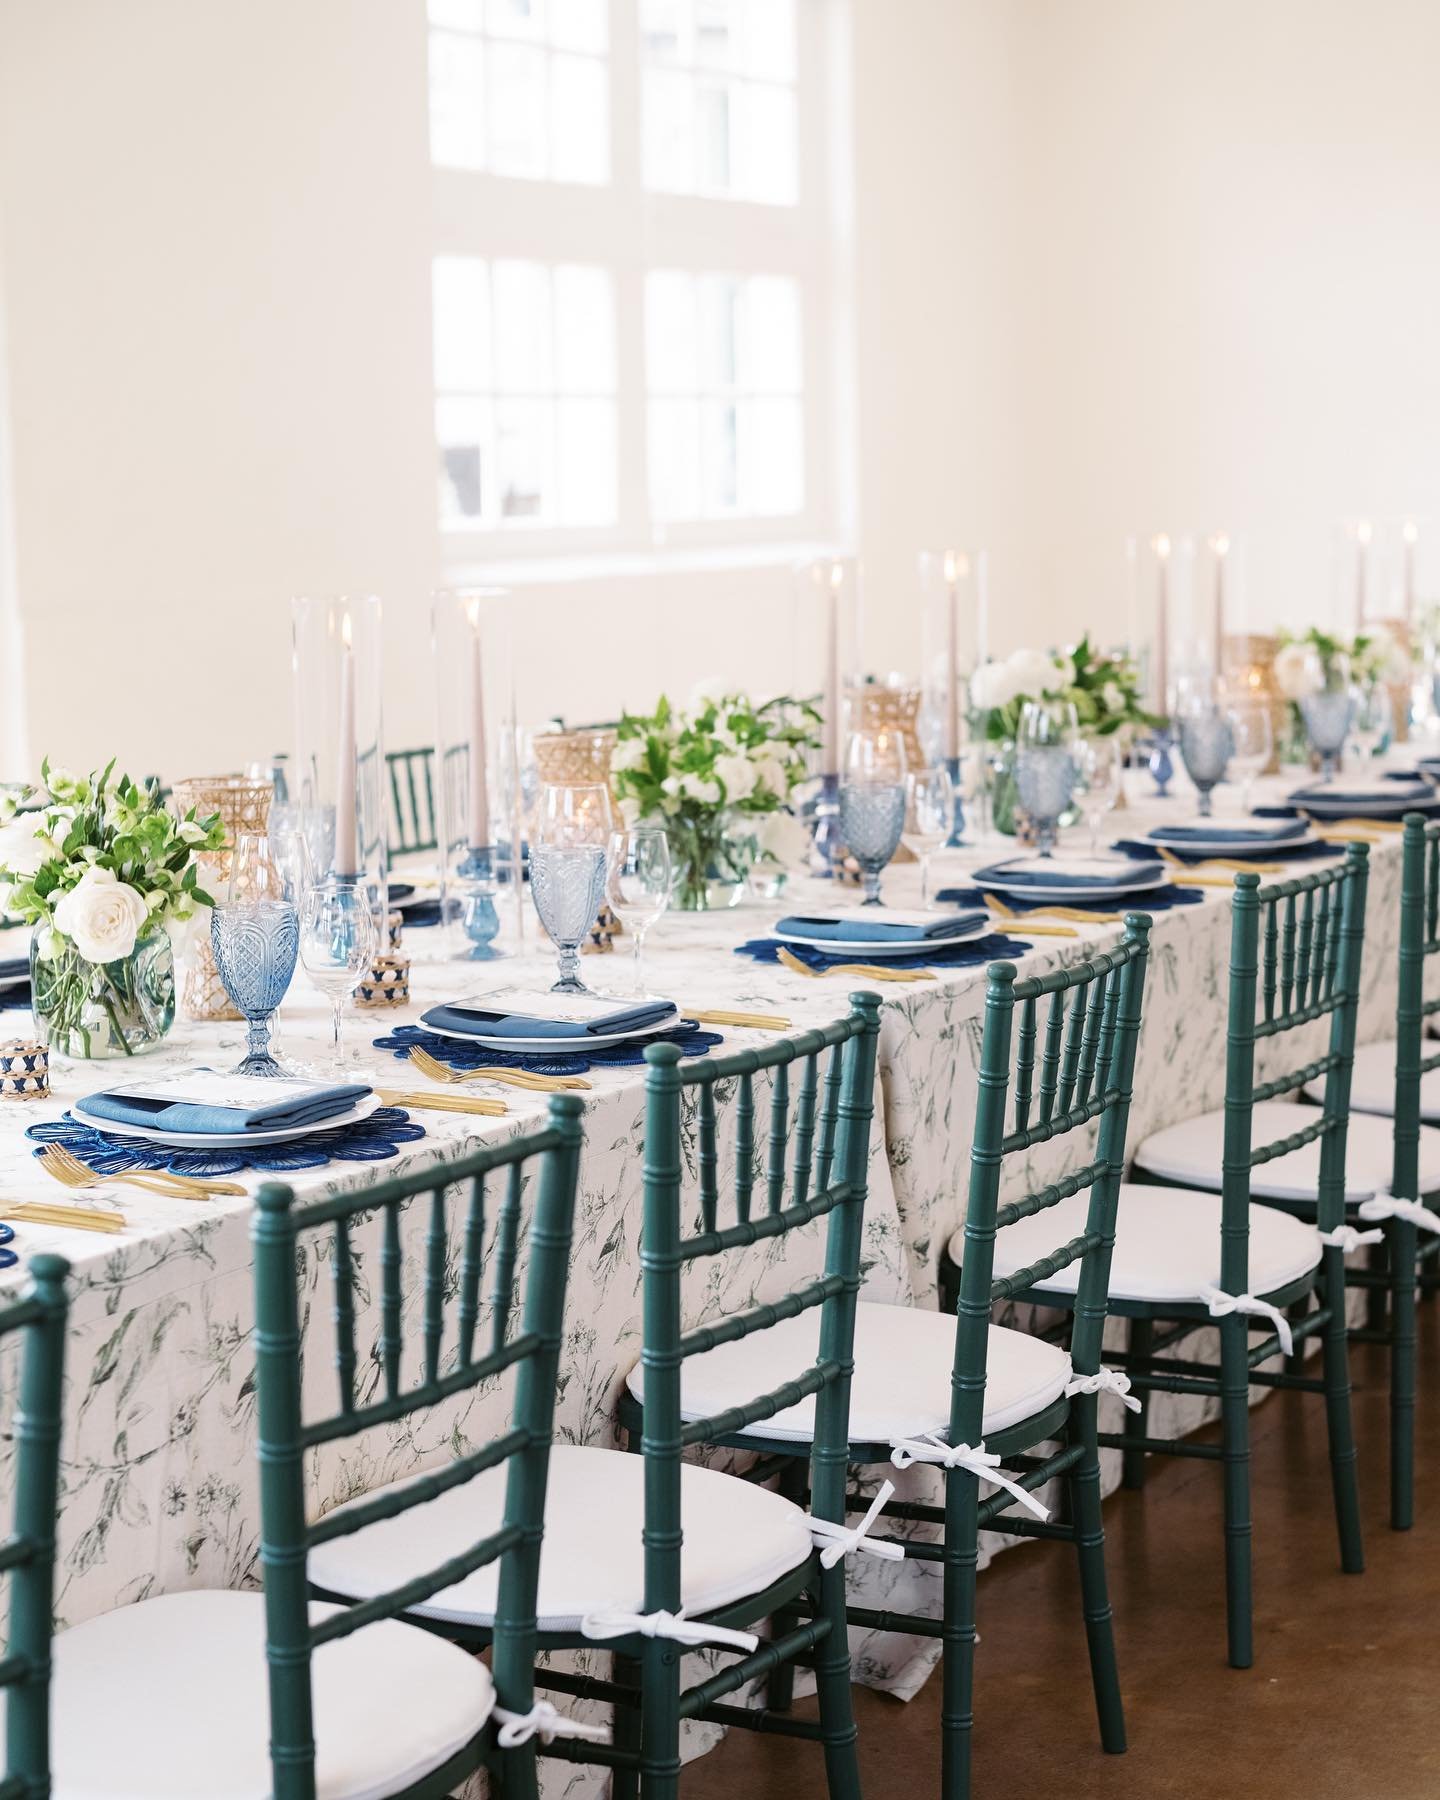 No matter how often we&rsquo;re tasked with designing an event in a classic blue and green palette, we&rsquo;ll never stop finding ways to make it interesting. 

Case in point: those chairs in a standard wood stain, gold or white finish would have be